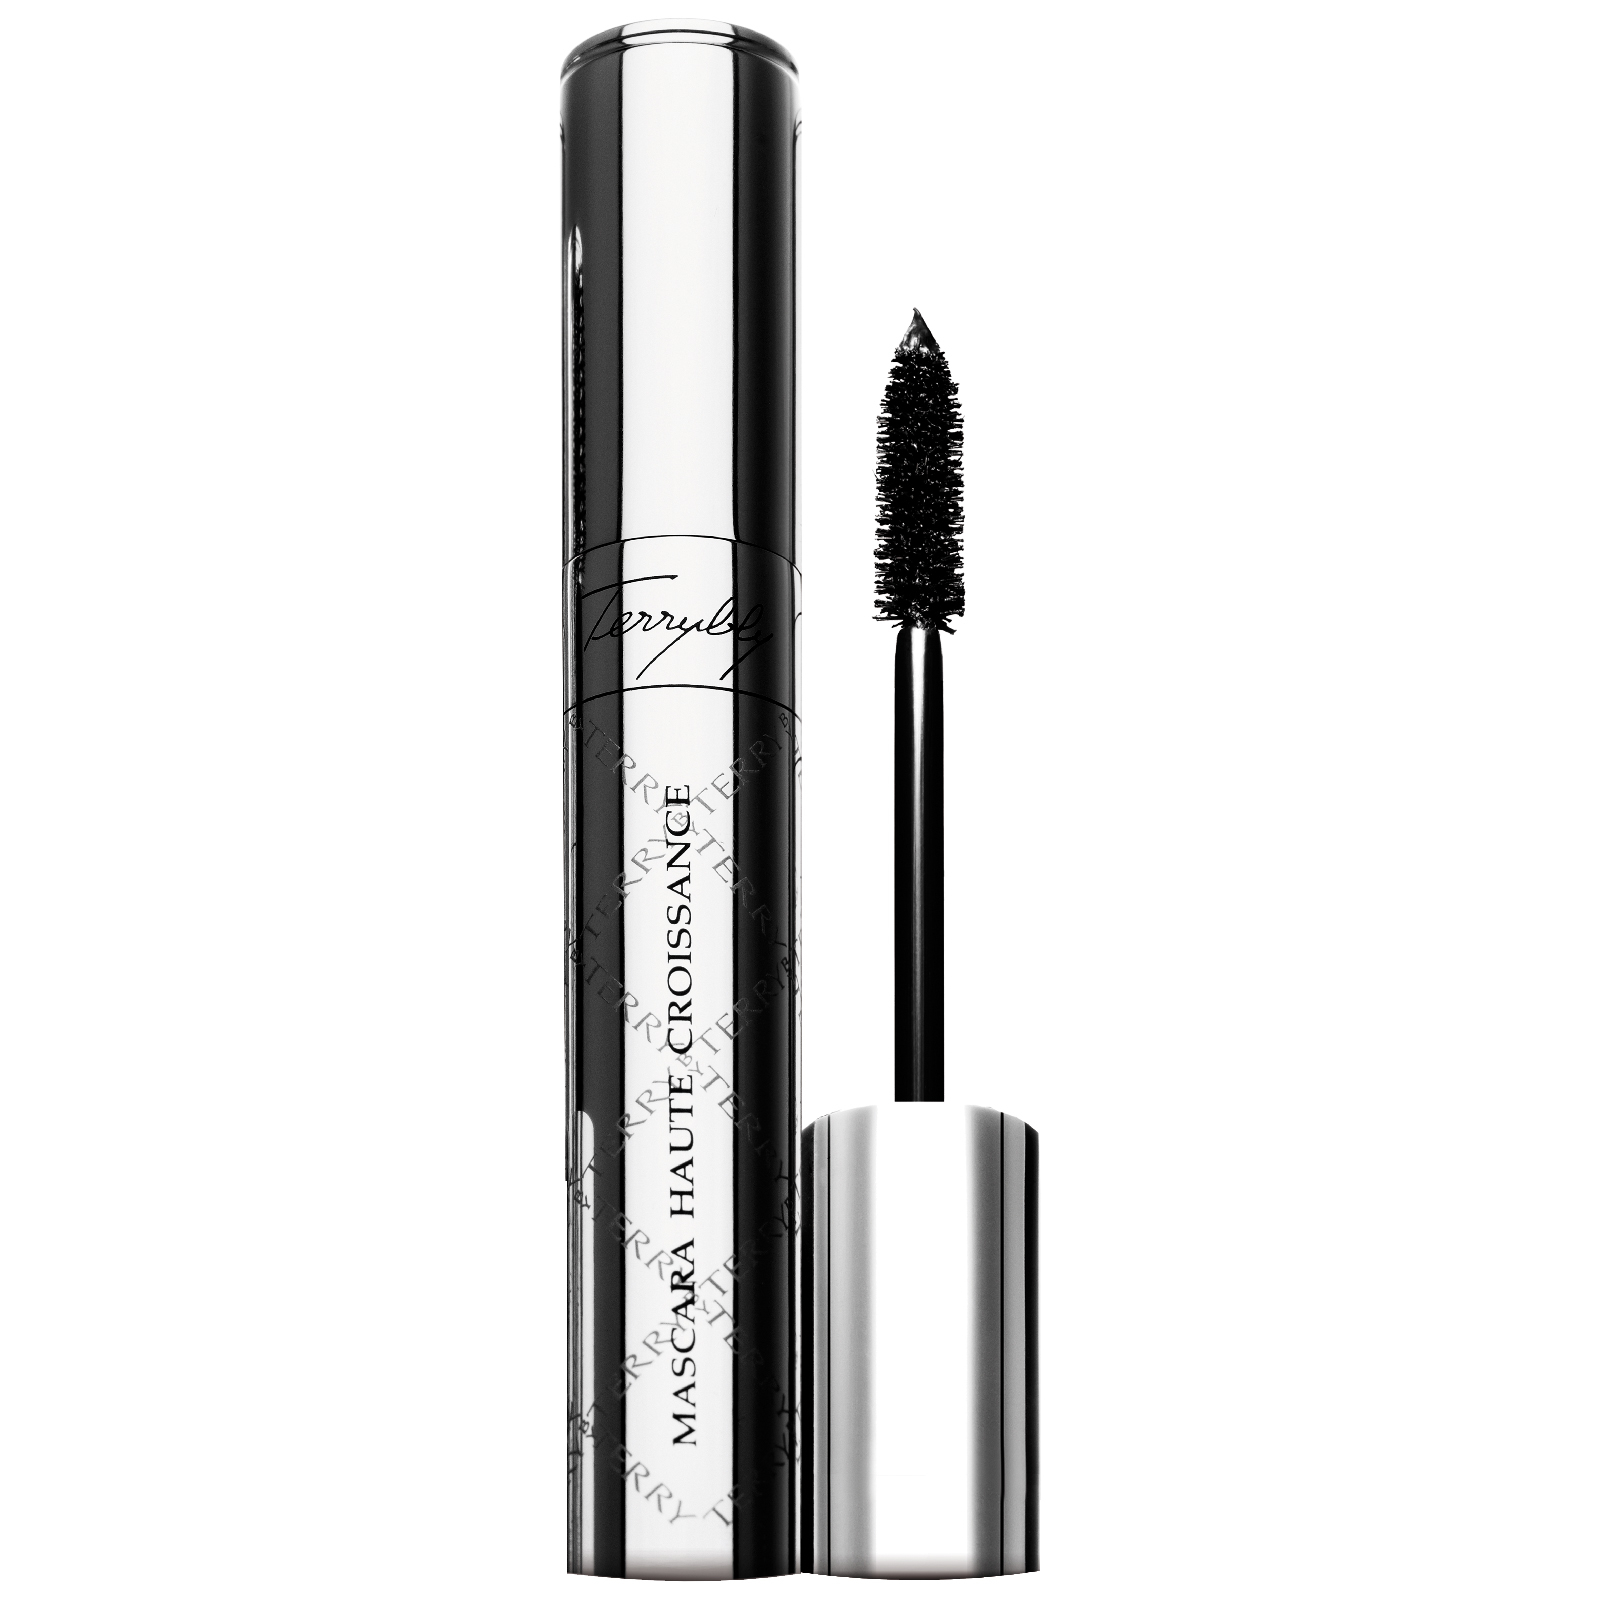 By Terry Terrybly Mascara 8ml (Various Shades) - 1. Black Parti-Pris